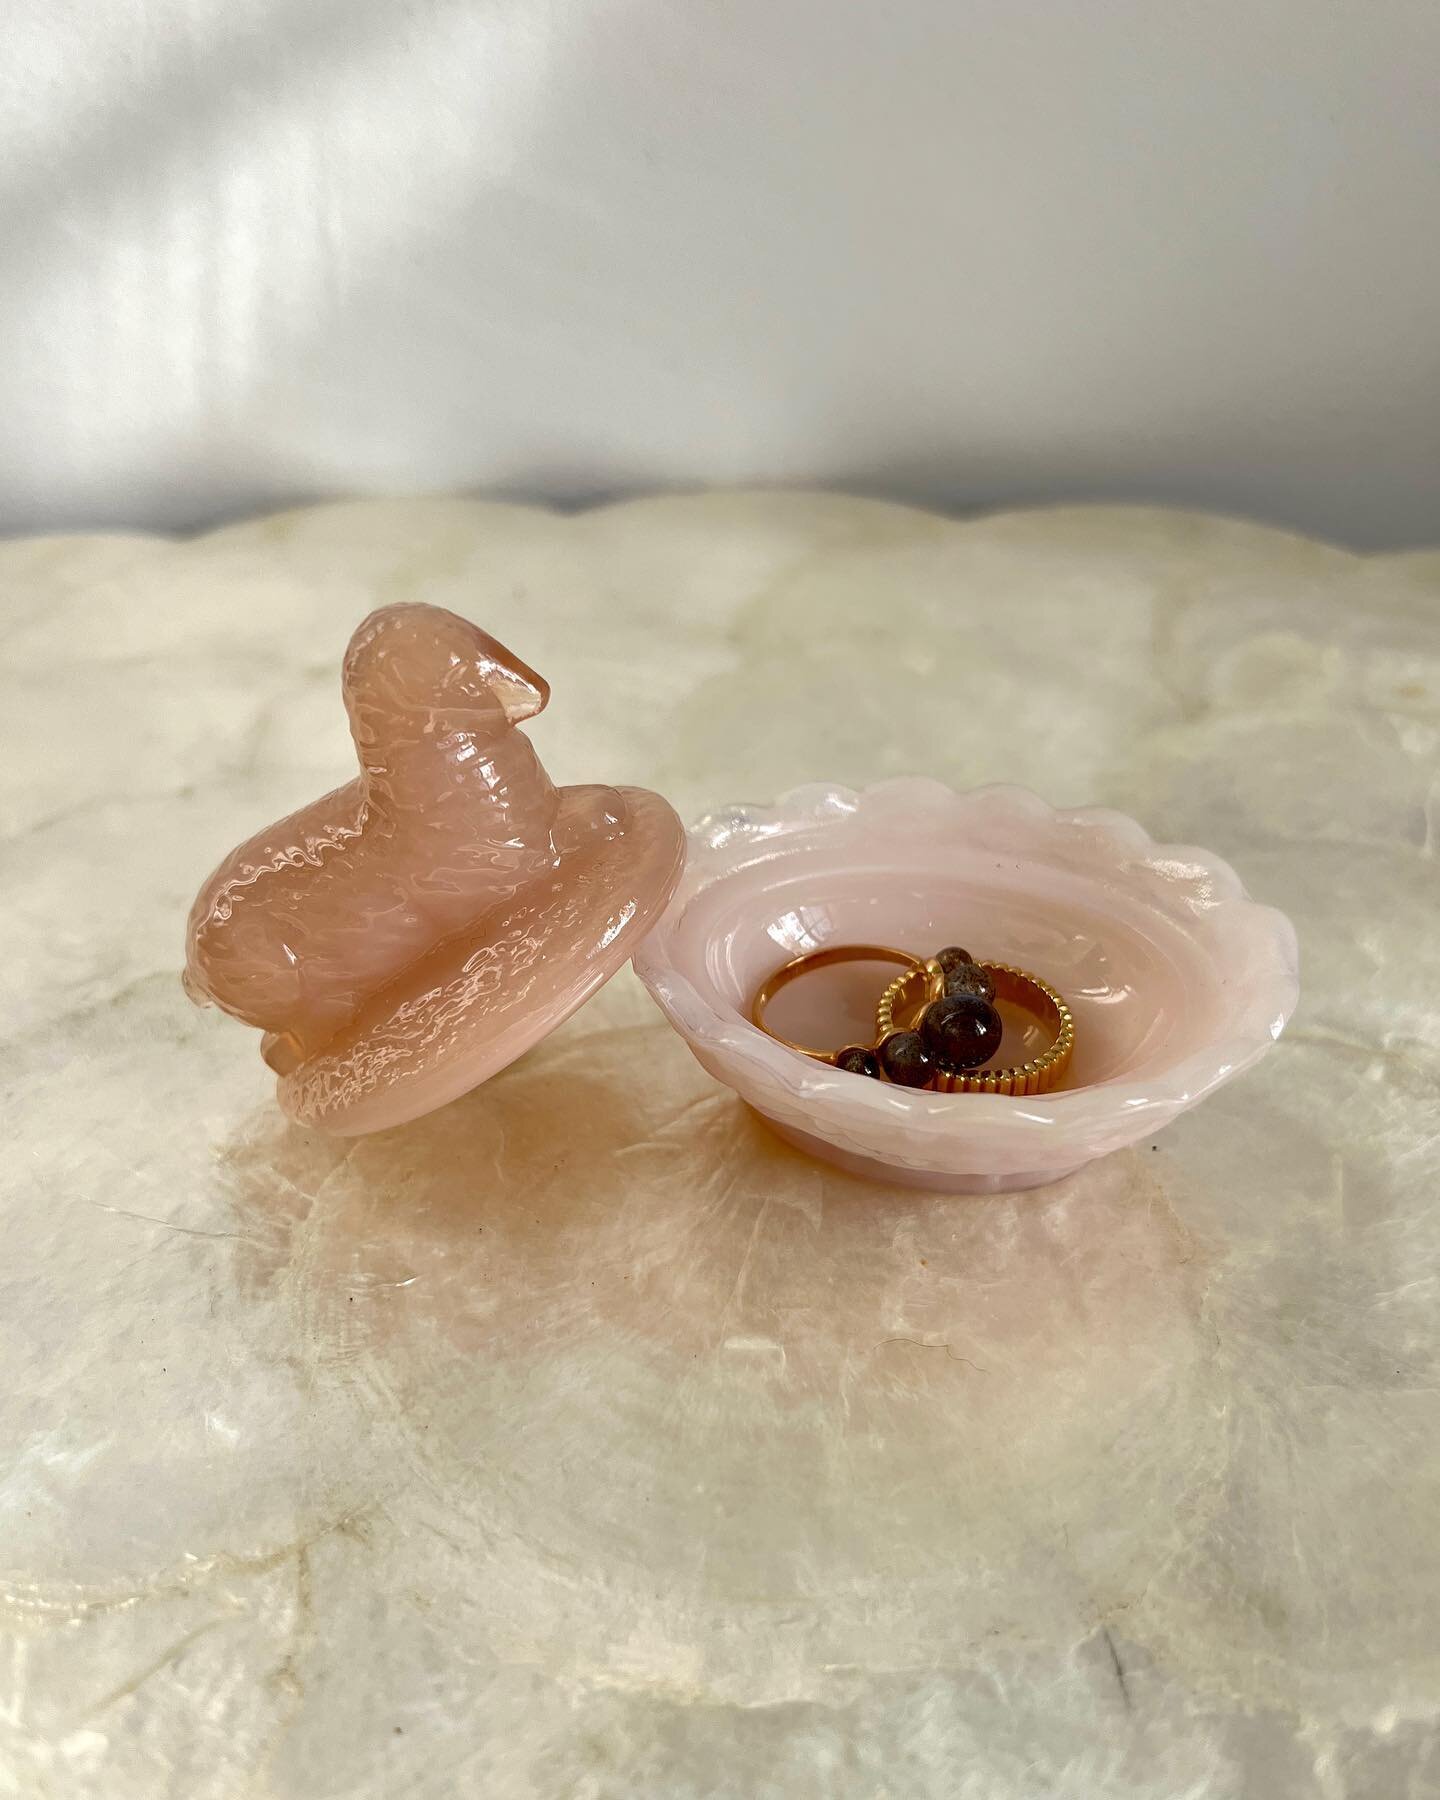 A mini glass stasher depicting a lamb atop a basket. The milk glass brings the opaline quality to the pink shade and the scalloped edges adds delicacy.

W 2&rdquo; / L 2.5&rdquo; / H 2.25&rdquo;

&bull; Pink Glass Lamb Basket Chamber &bull; $52

For 